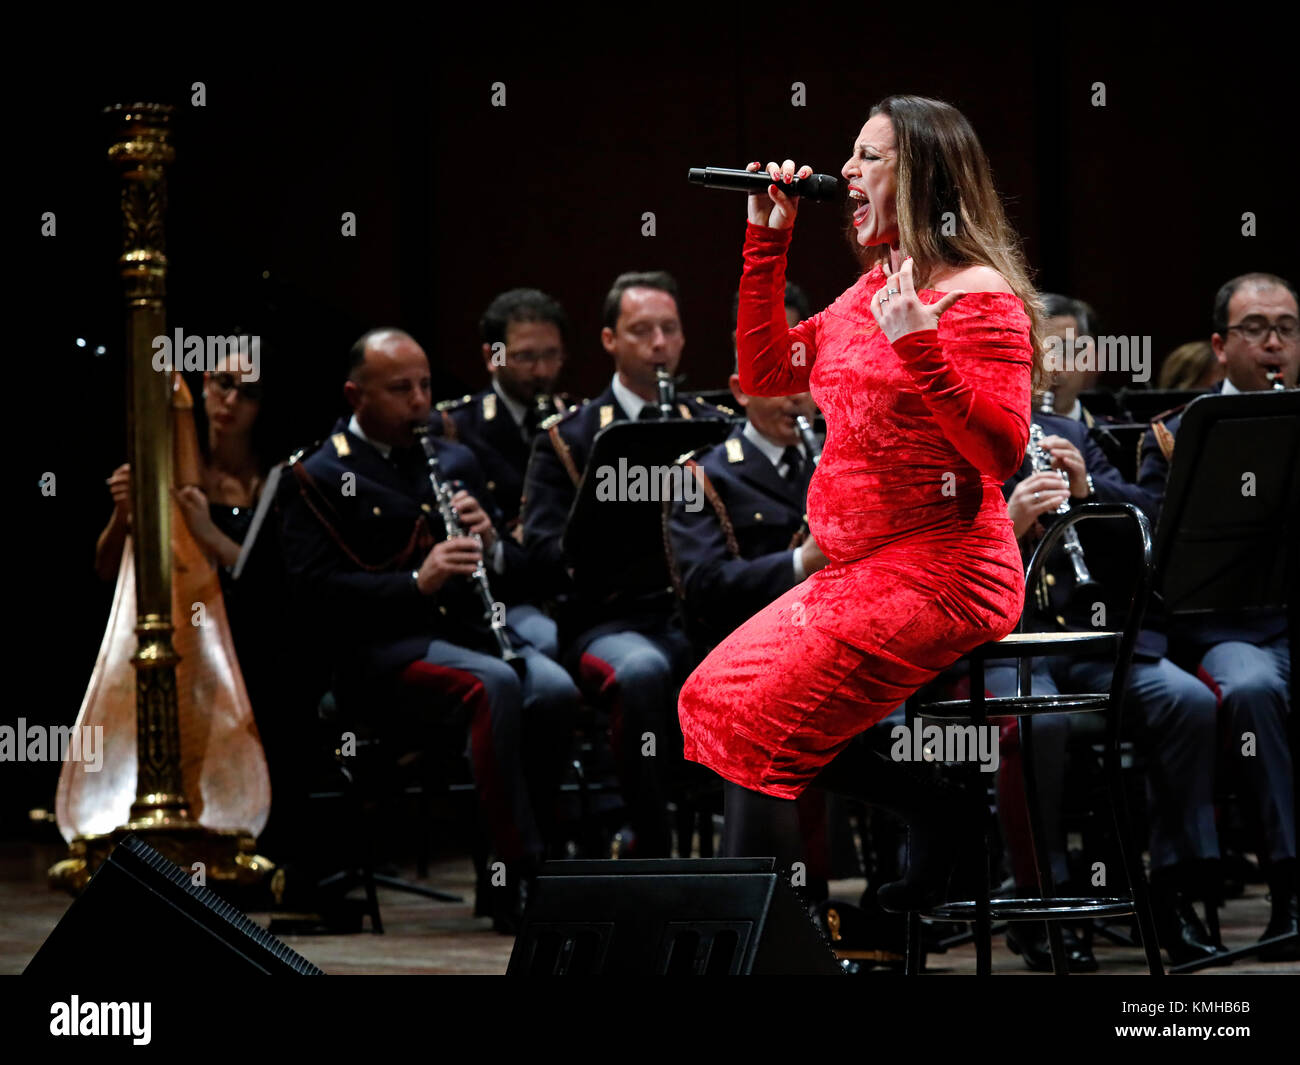 Rome, Italy - 11 December 2017: the singer Annalisa Minetti performs on the stage of the Auditorium Parco della Musica, on the occasion of the concert of the State Police Band, 'Be there always, with music and words'. Stock Photo